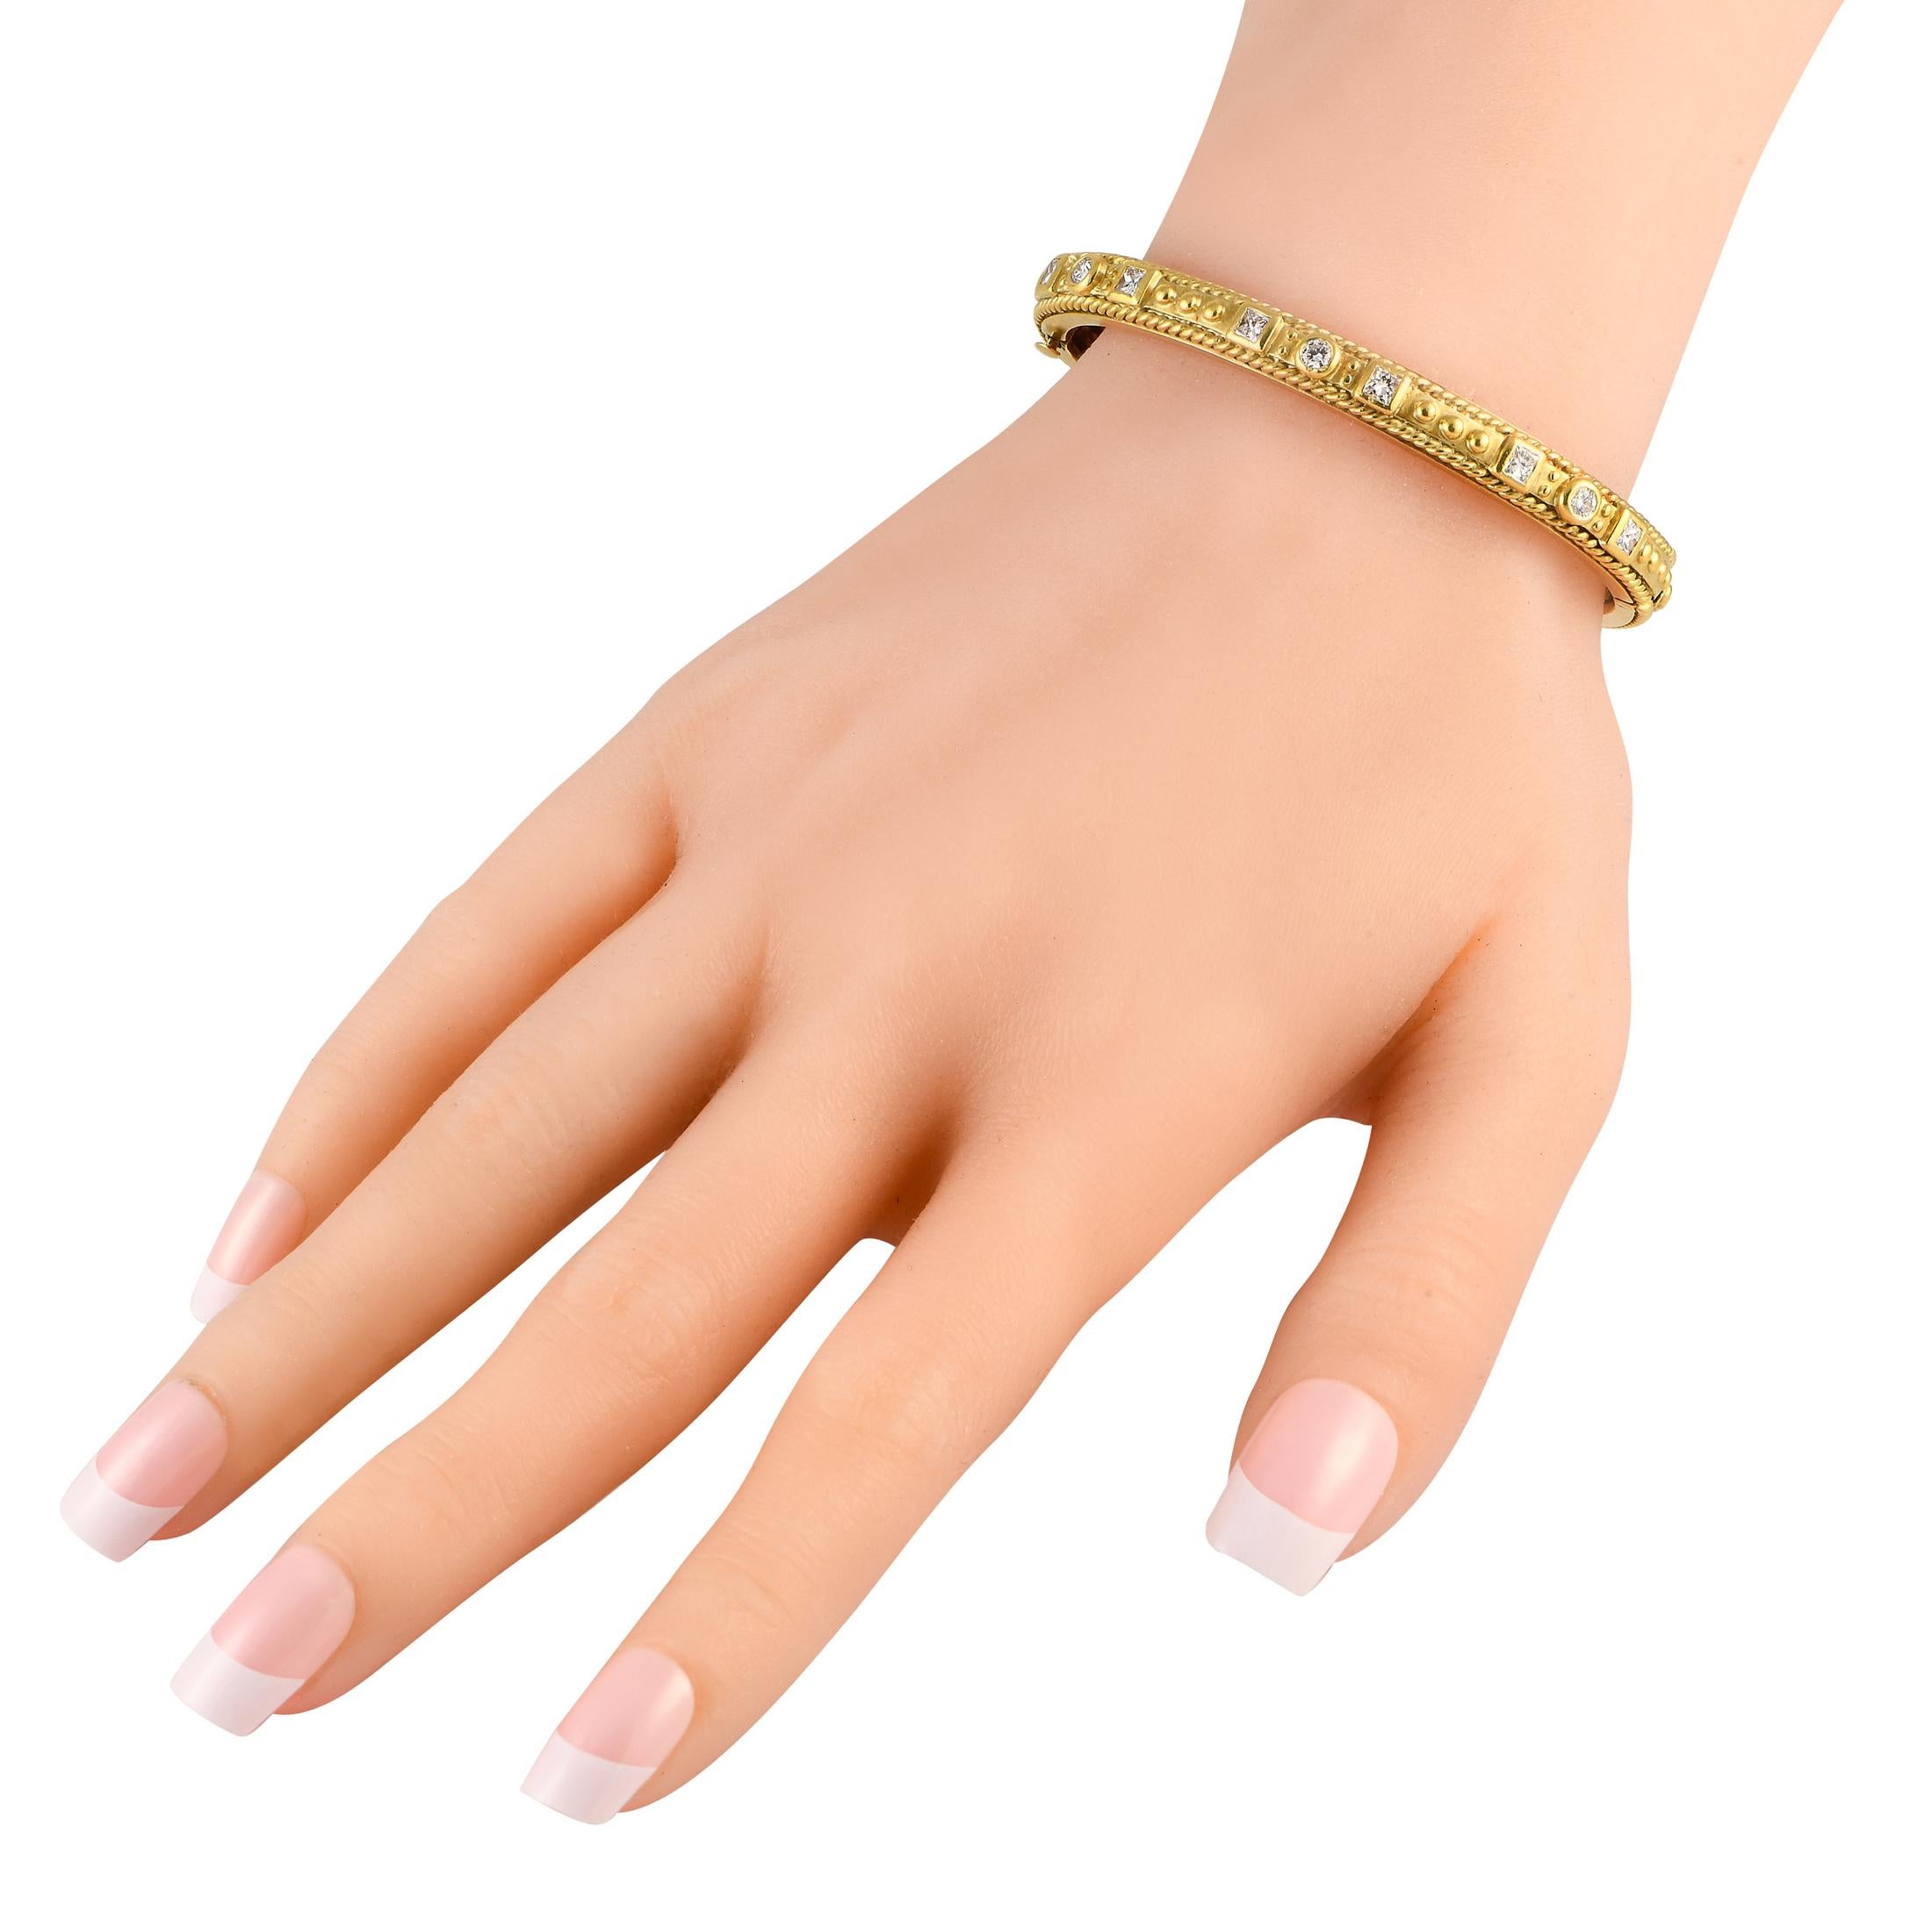 A weighty, tactile, and charming piece of jewel to bring interest to your looks. This hinged bangle bracelet from Raafty is made of 18K yellow gold and has a slender profile. The edges feature a rope-style border while the middle surface displays a